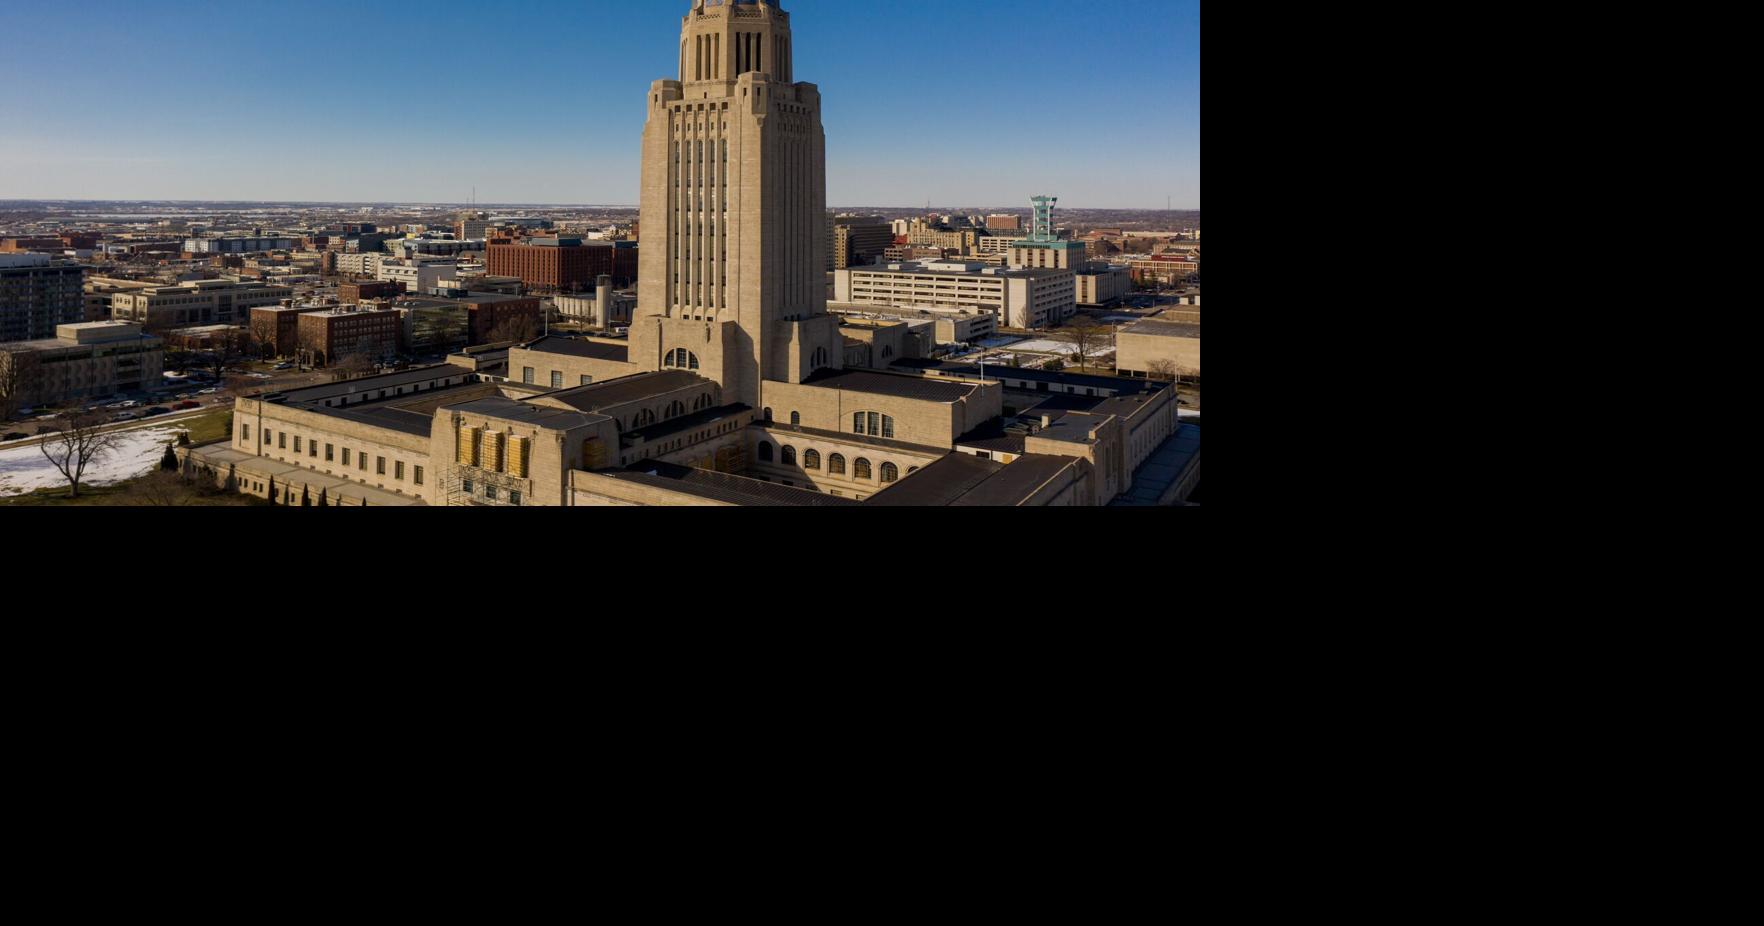 ‘Extraordinarily high’ revenues for Nebraska expected to drop, fiscal analyst says